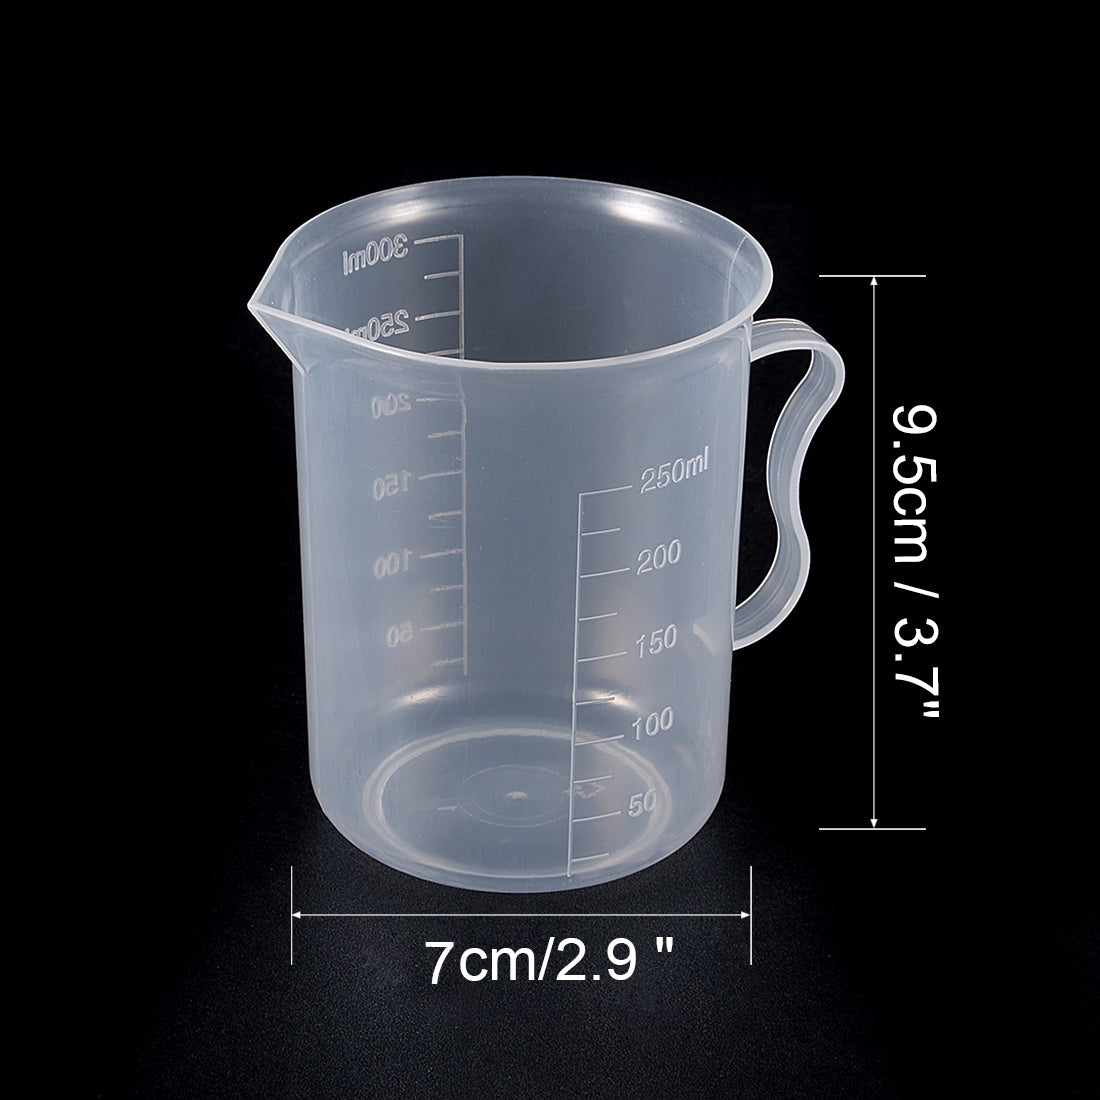 uxcell Uxcell 5pcs Laboratory Clear White PP 300mL Measuring Cup Handled Beaker